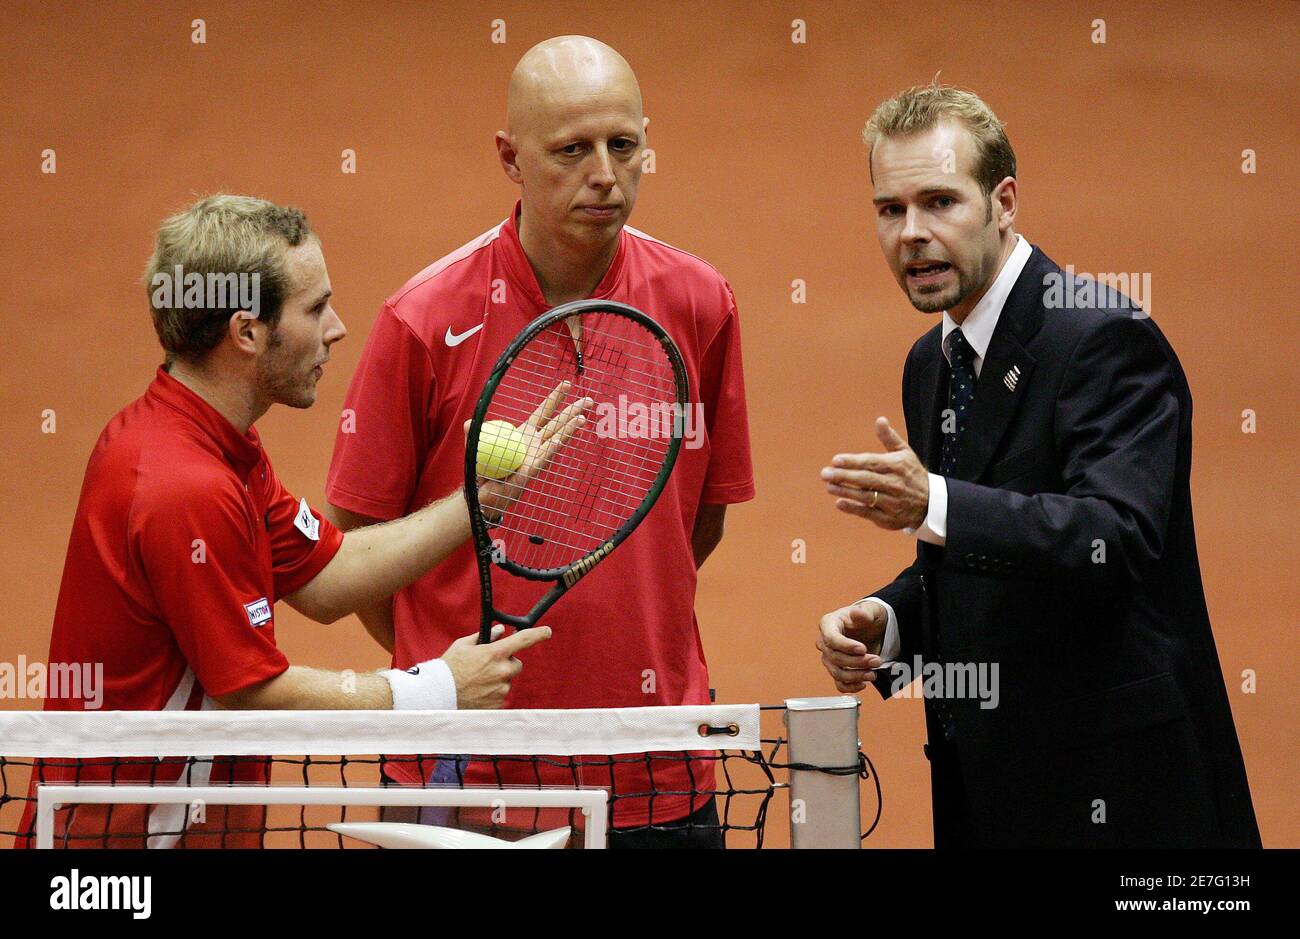 Olivier Rochus (L) of Belgium and his coach Steven Martens (C) talk to  umpire Sune Alenkaer during a Davis Cup World Group Play-offs tennis match  between Rochus and Andy Roddick of the